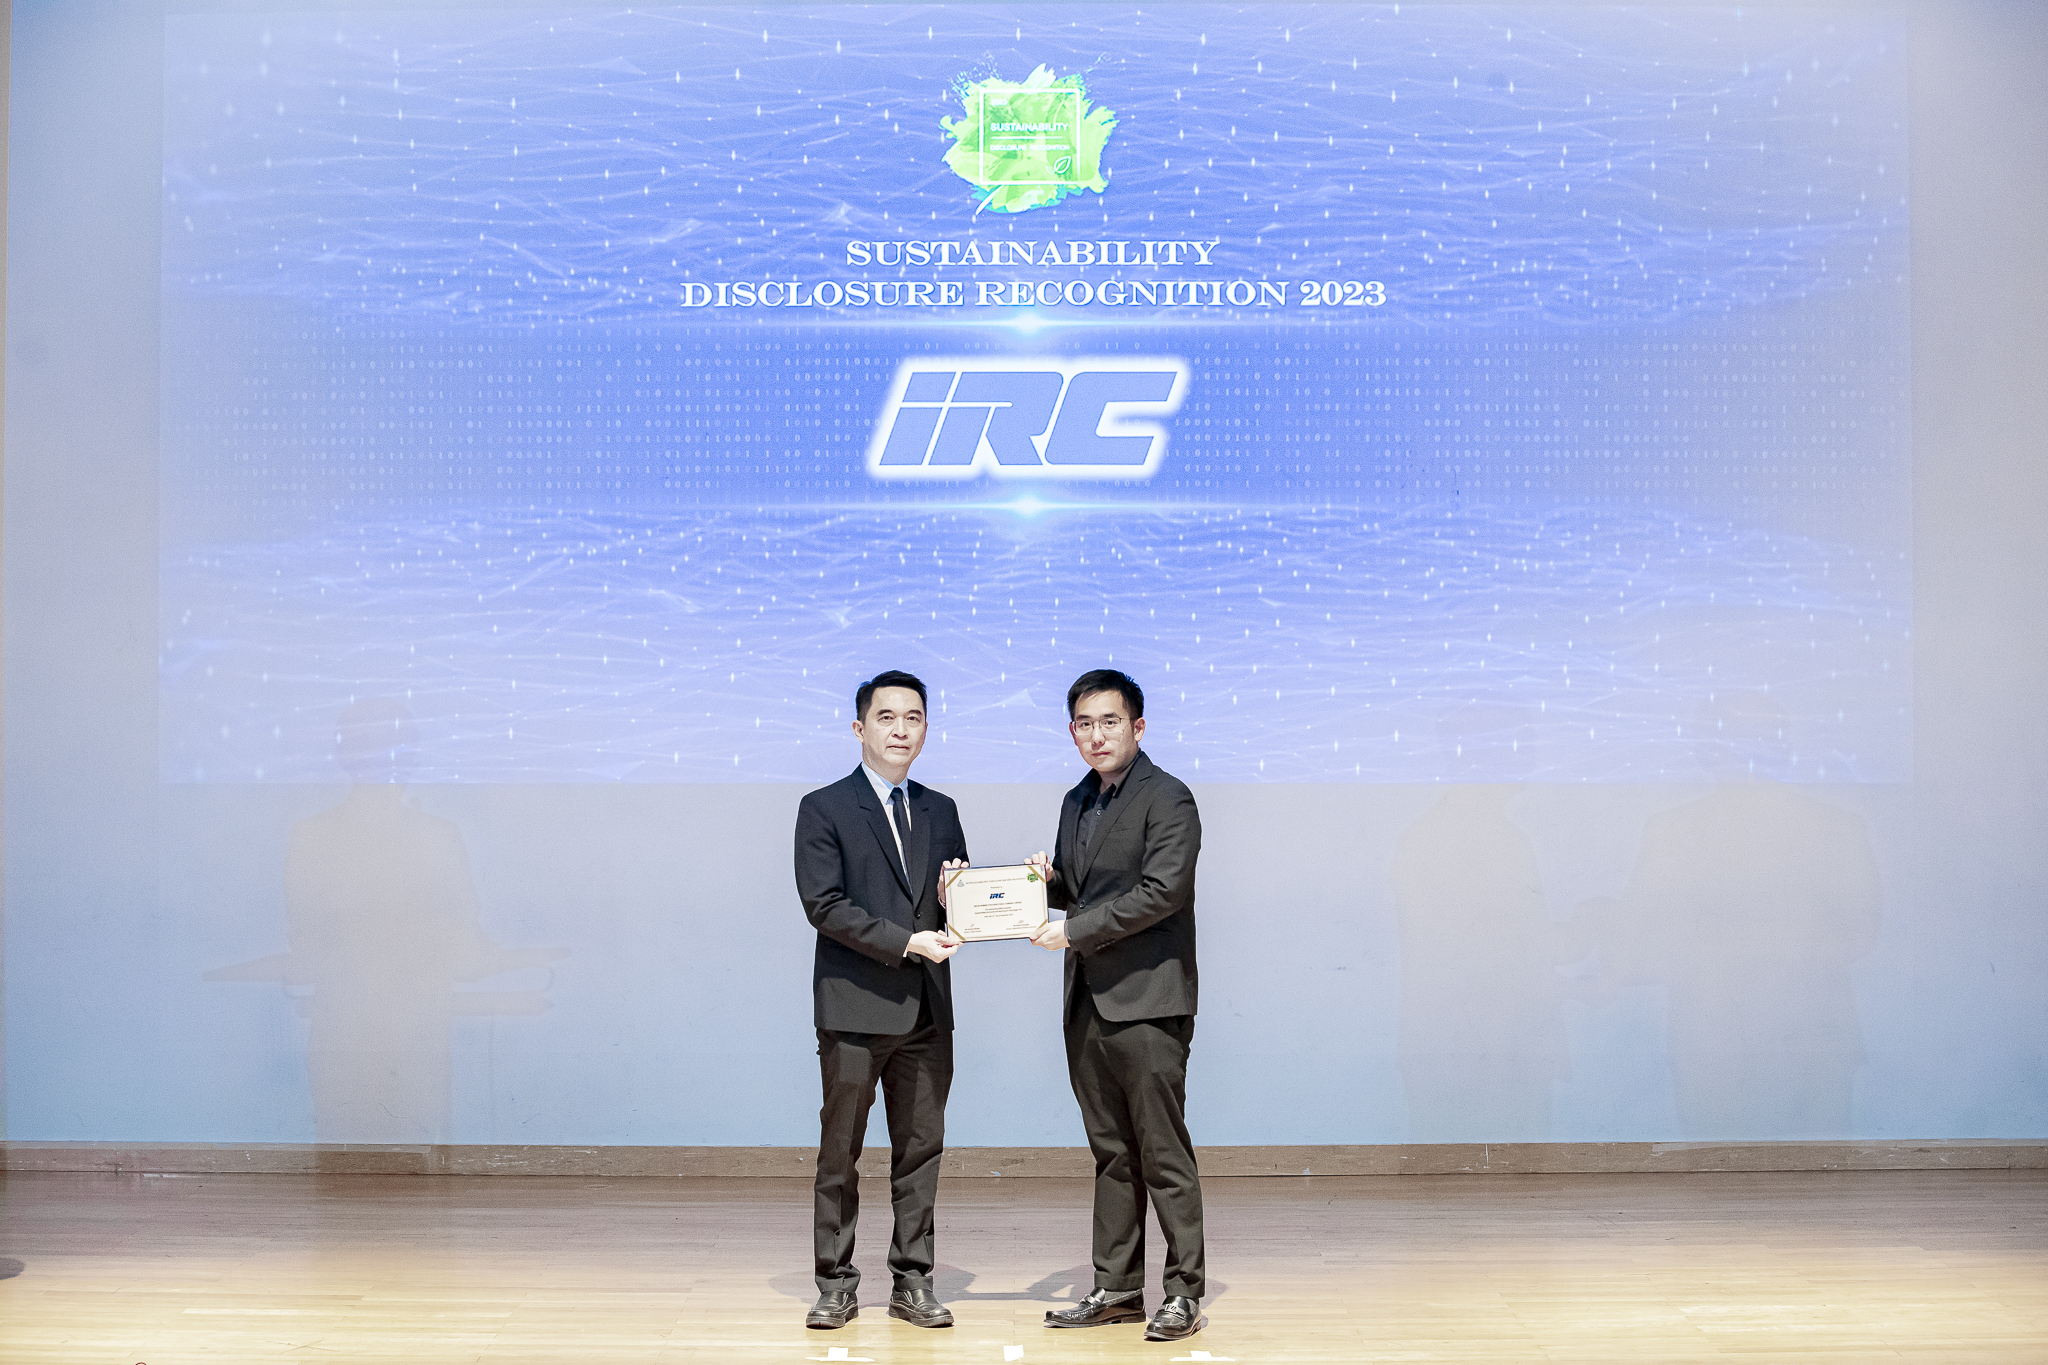 IRC received “Sustainability Disclosure Recognition” 2023 from Thaipat Institute